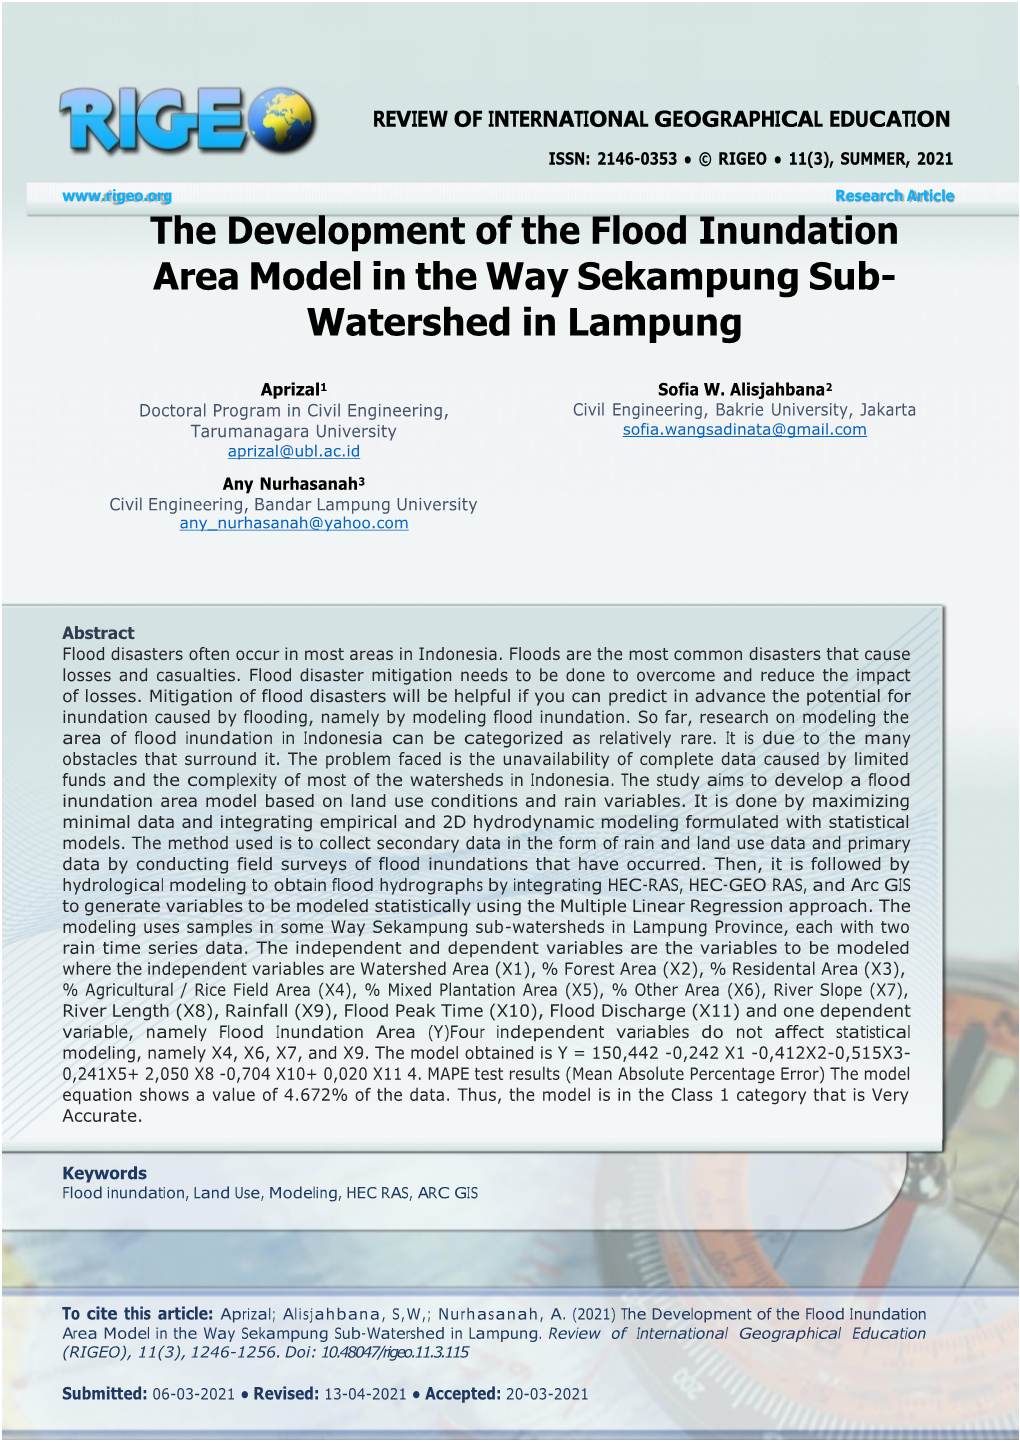 The Development of the Flood Inundation Area Model in the Way Sekampung Sub- Watershed in Lampung